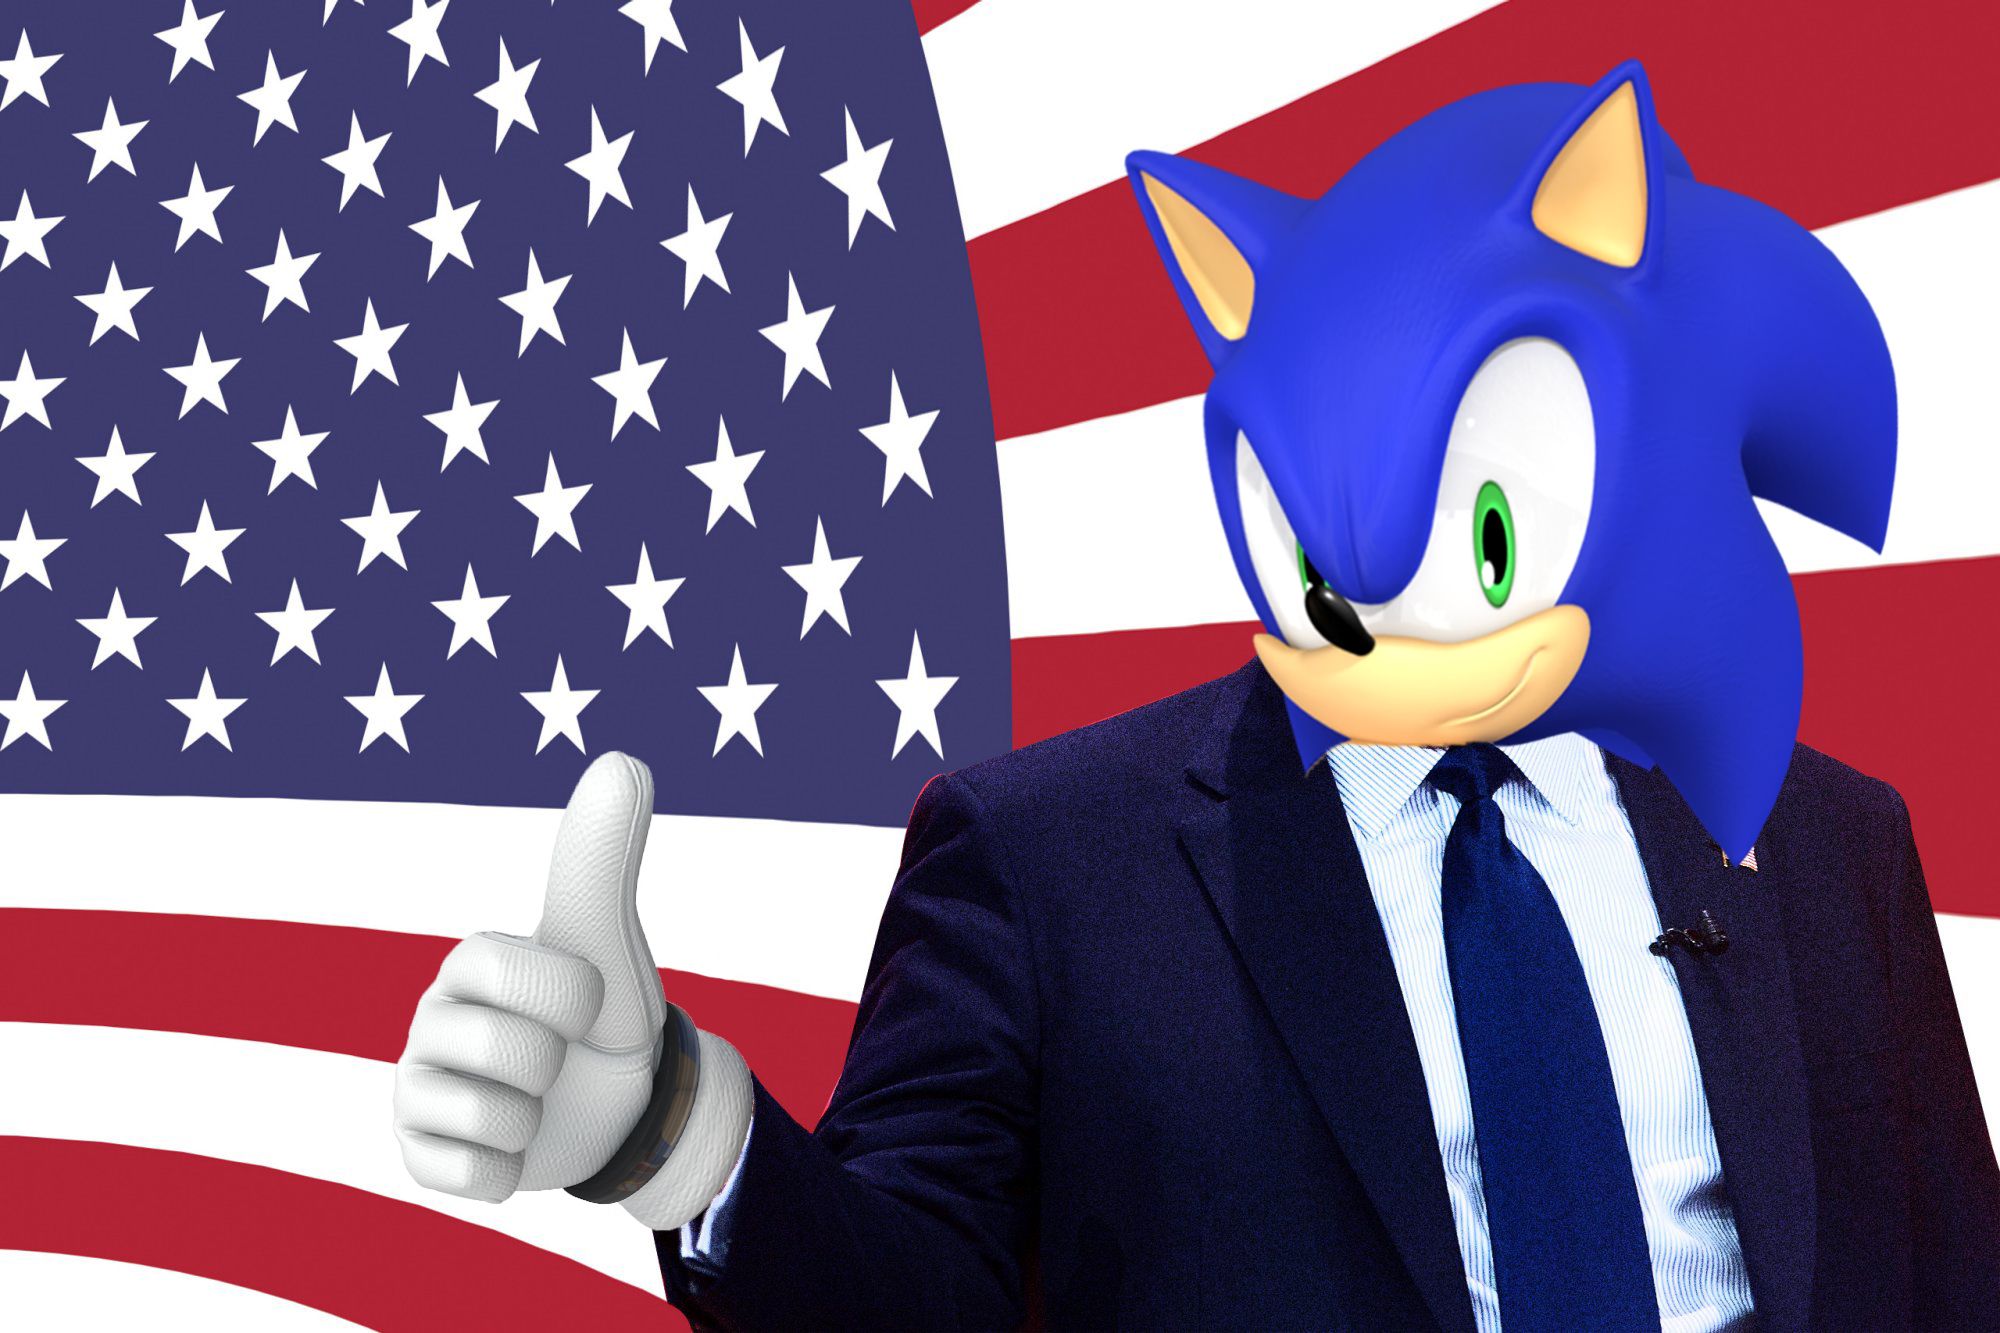 Make The Right Choice For Our Youth And The Future Of Our Country;  Change The National Anthem To “Escape From The City” - Sonic Adventure 2